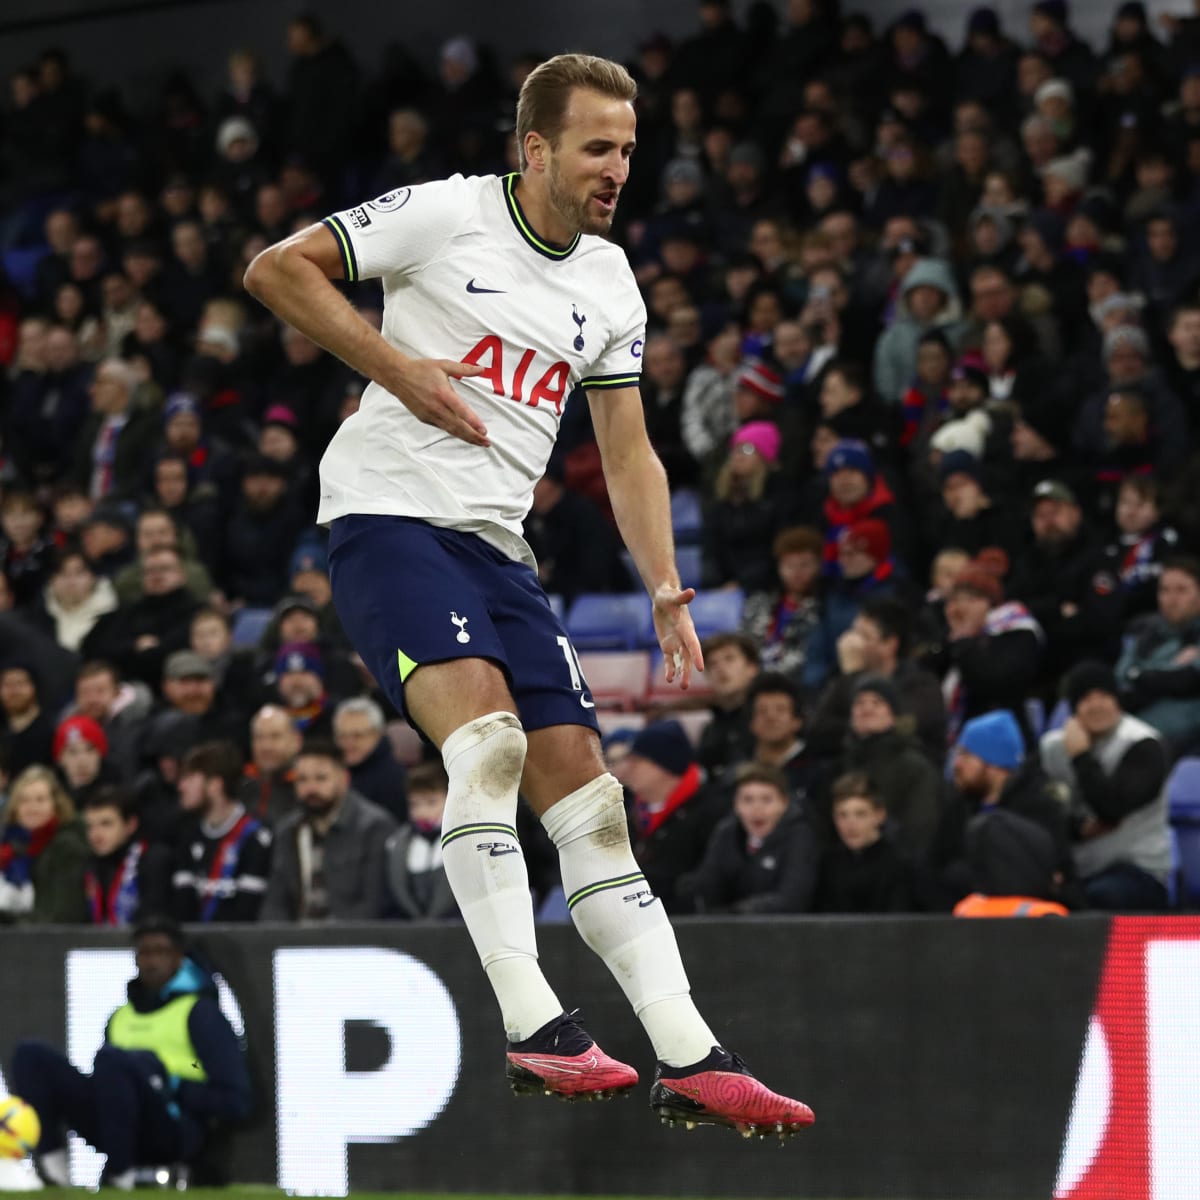 Tottenham fans will love what Harry Kane has done as Spurs release